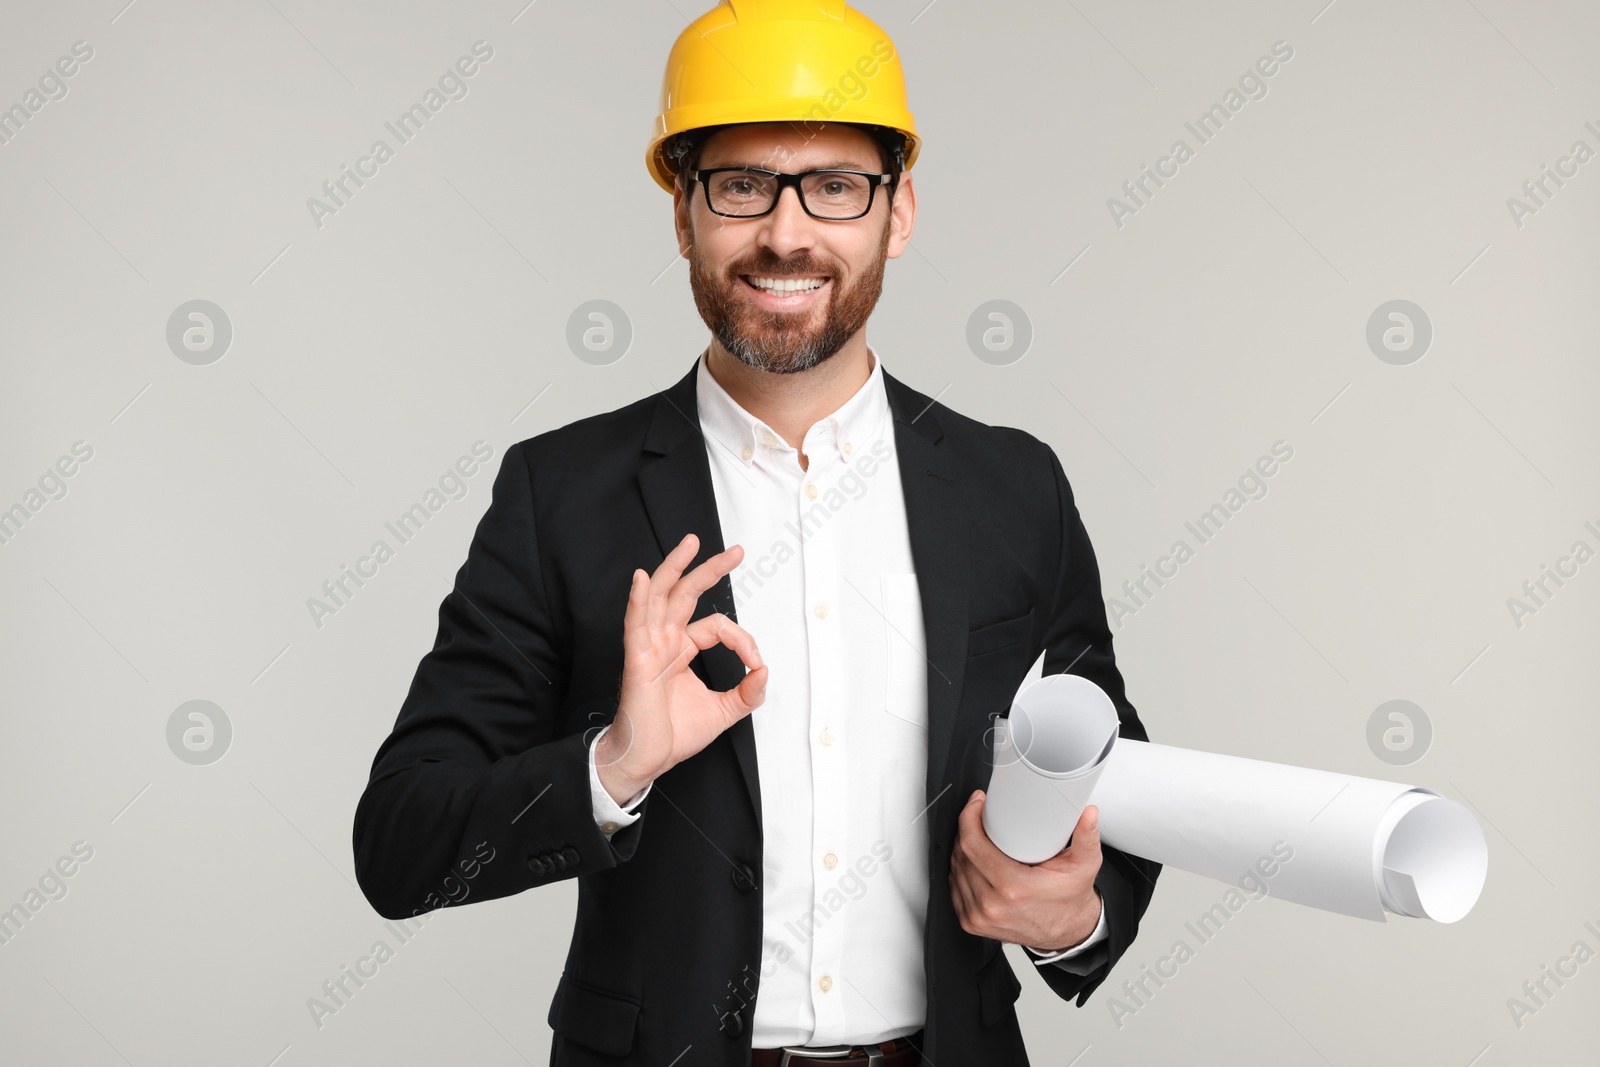 Photo of Architect in hard hat with drafts showing OK gesture on gray background